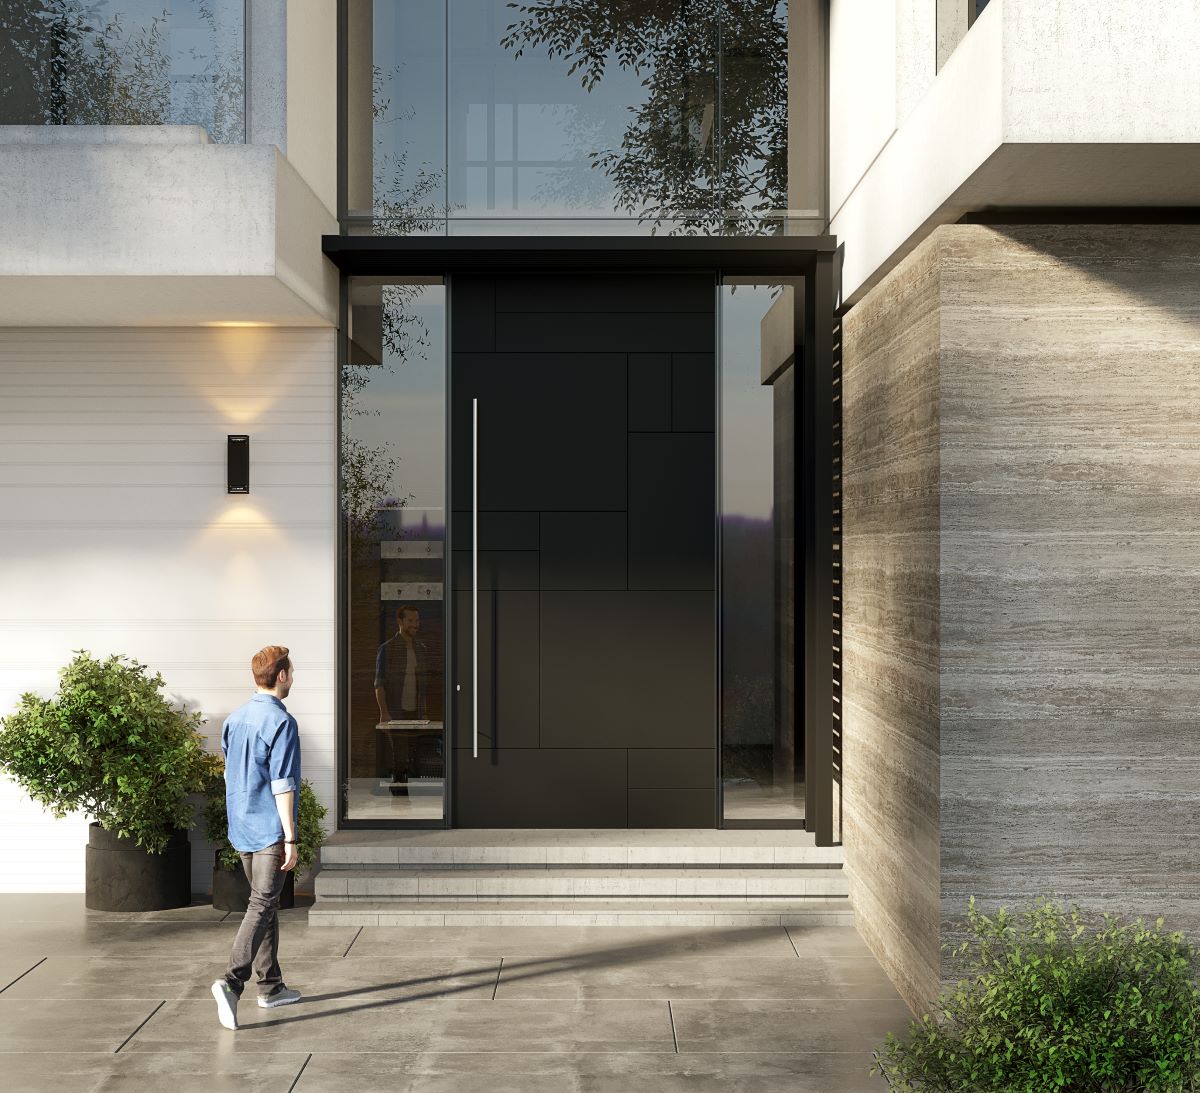 over-sized residential entrance door